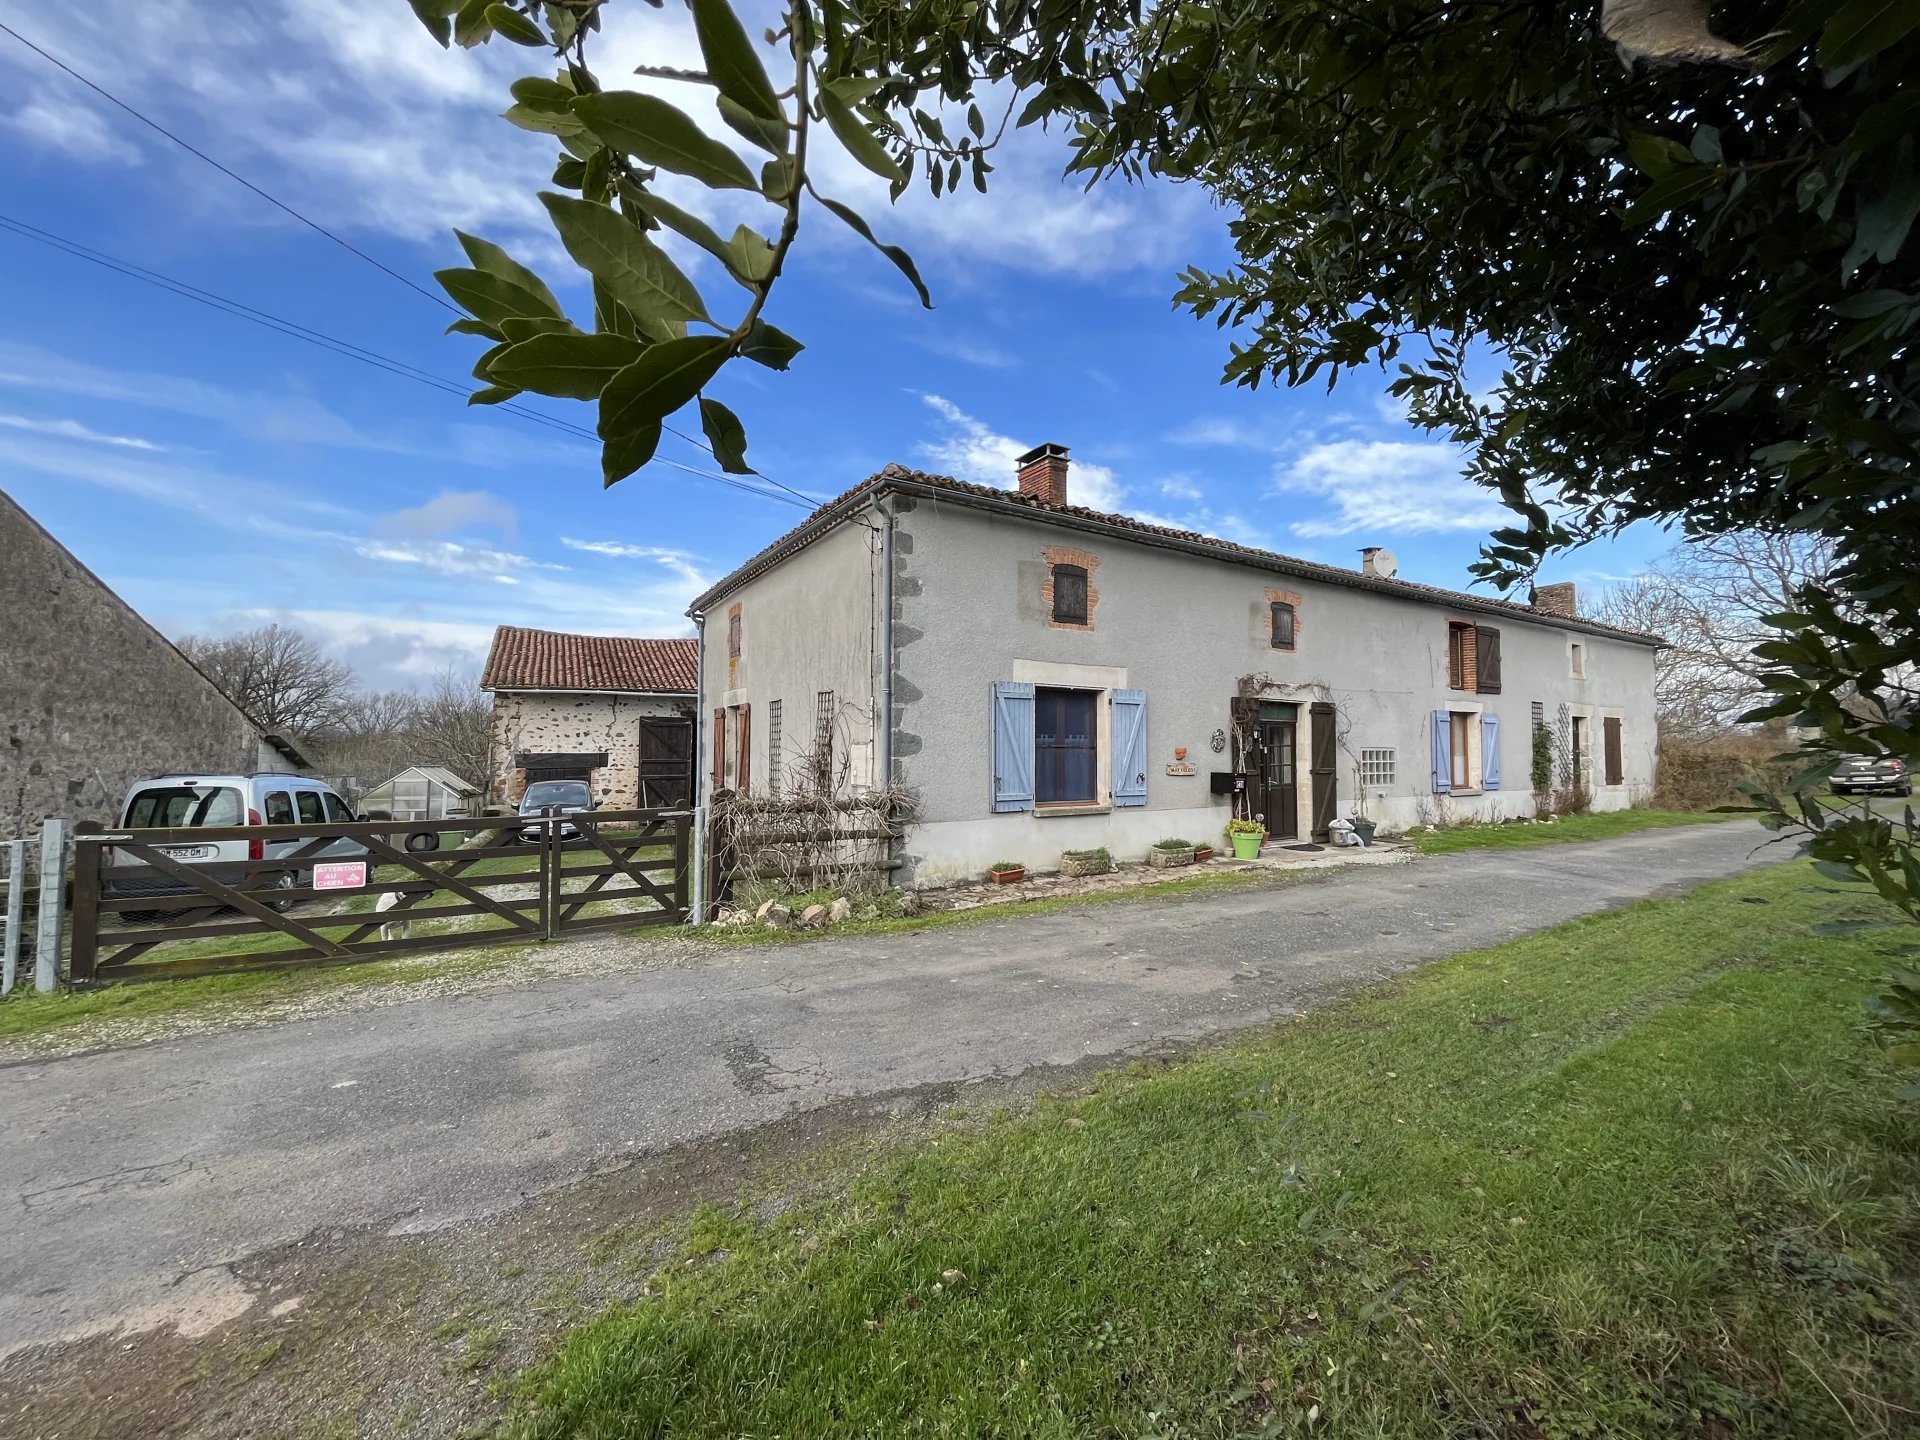 Farmhouse/small holding/equestrian property with 4.5 hectares